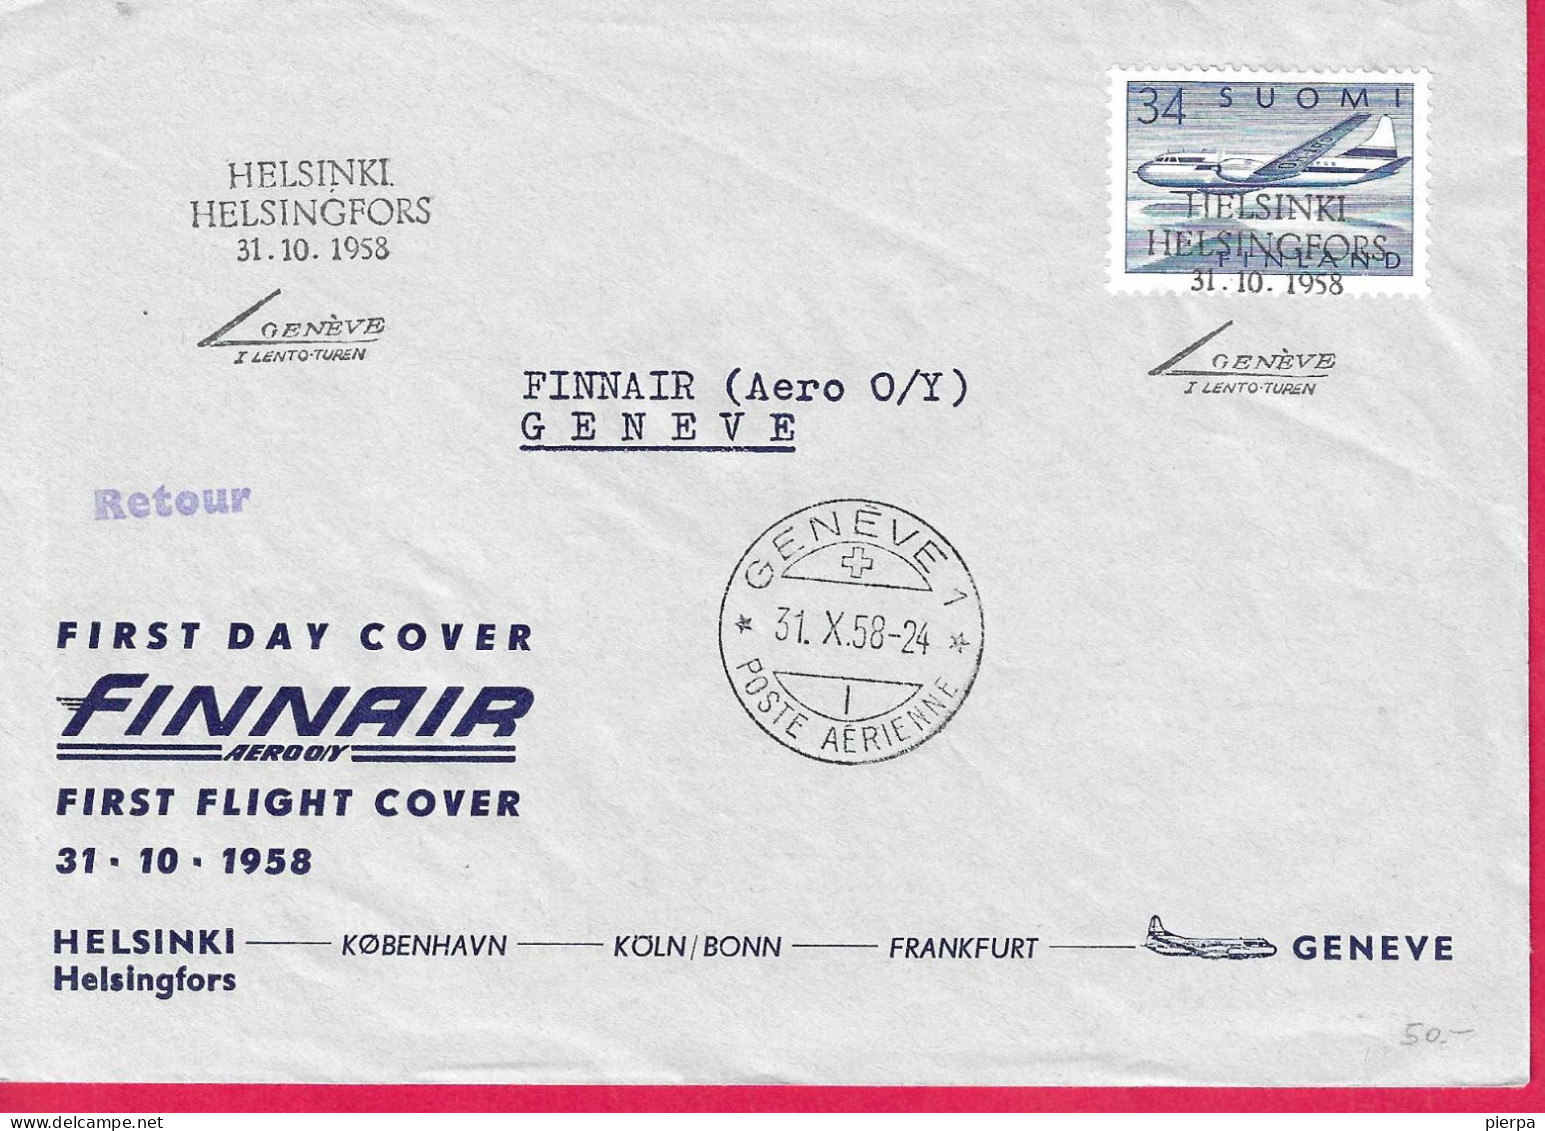 FINLAND- FIRST FLIGHT FINNAIR FROM HELSINKI TO GENEVE*31.10.58* ON OFFICIALE COVER - Covers & Documents